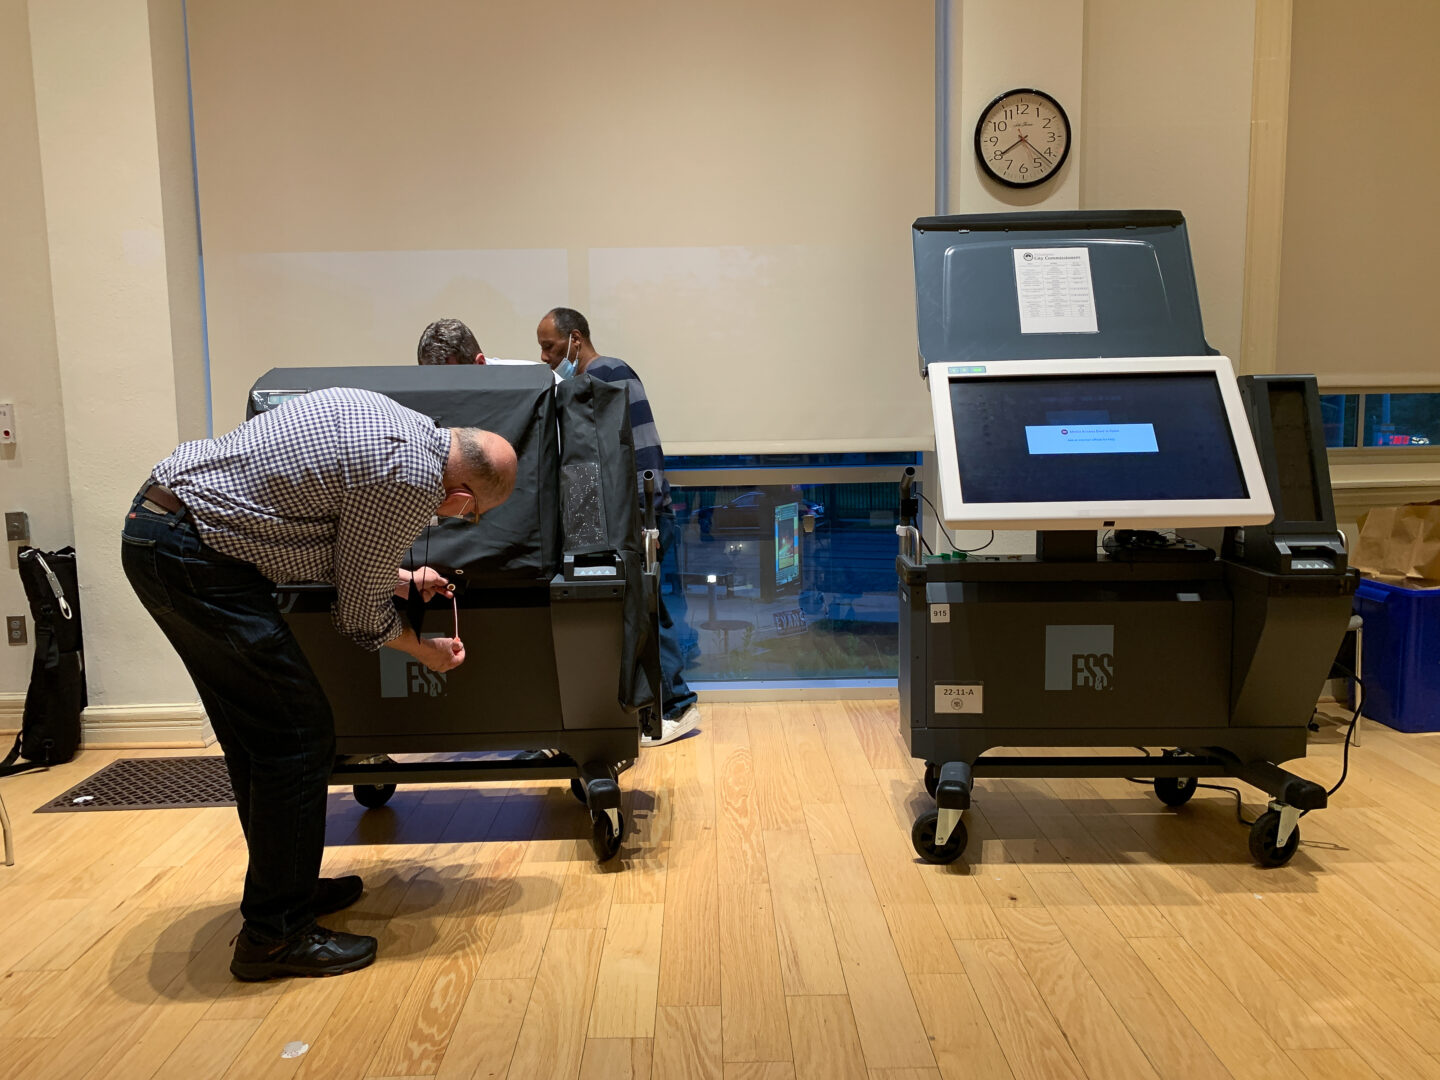 Election workers close down the voting machines in a step by step process.